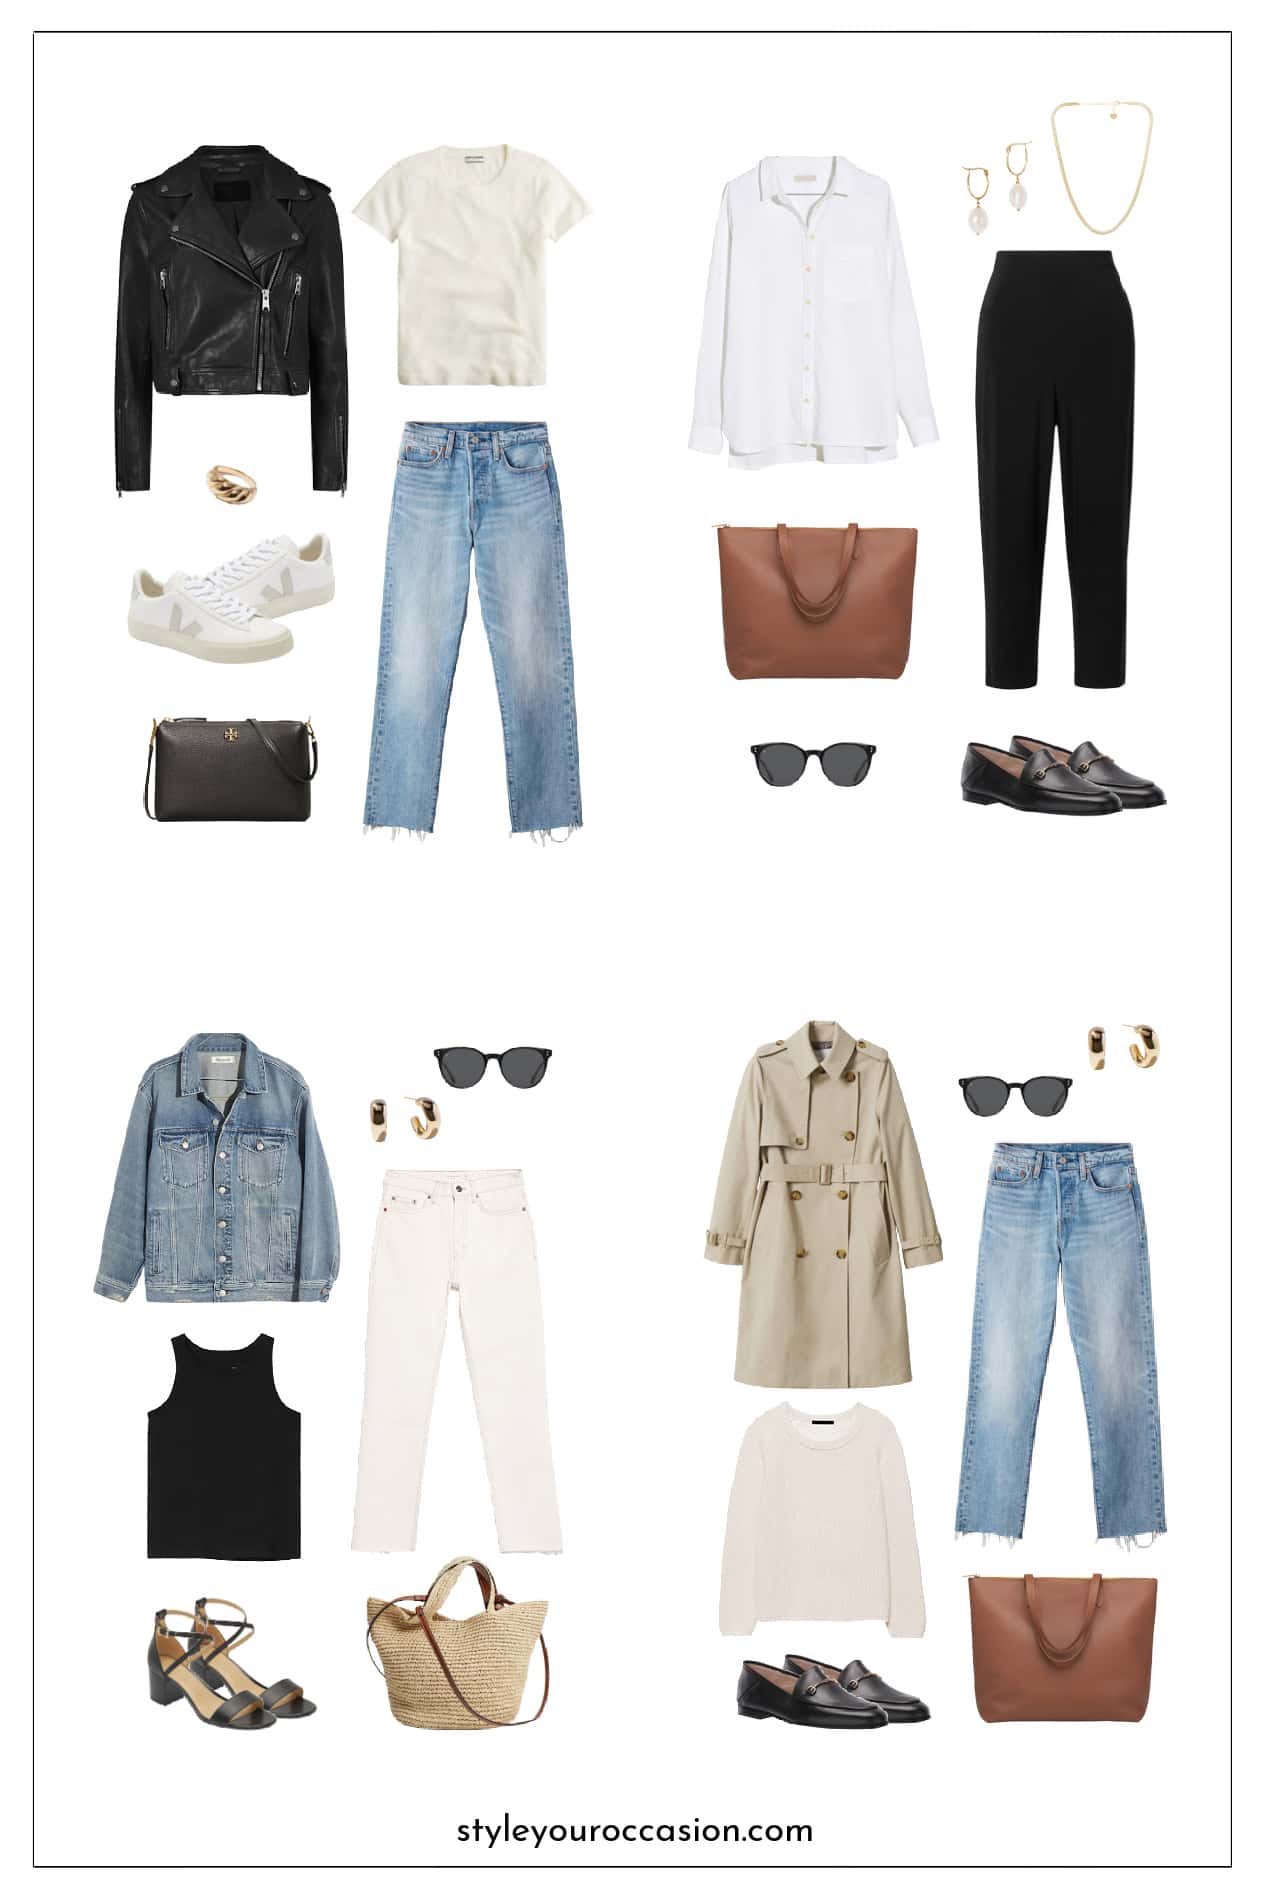 image of a collage of neutral women's outfits for a minimalist capsule wardrobe